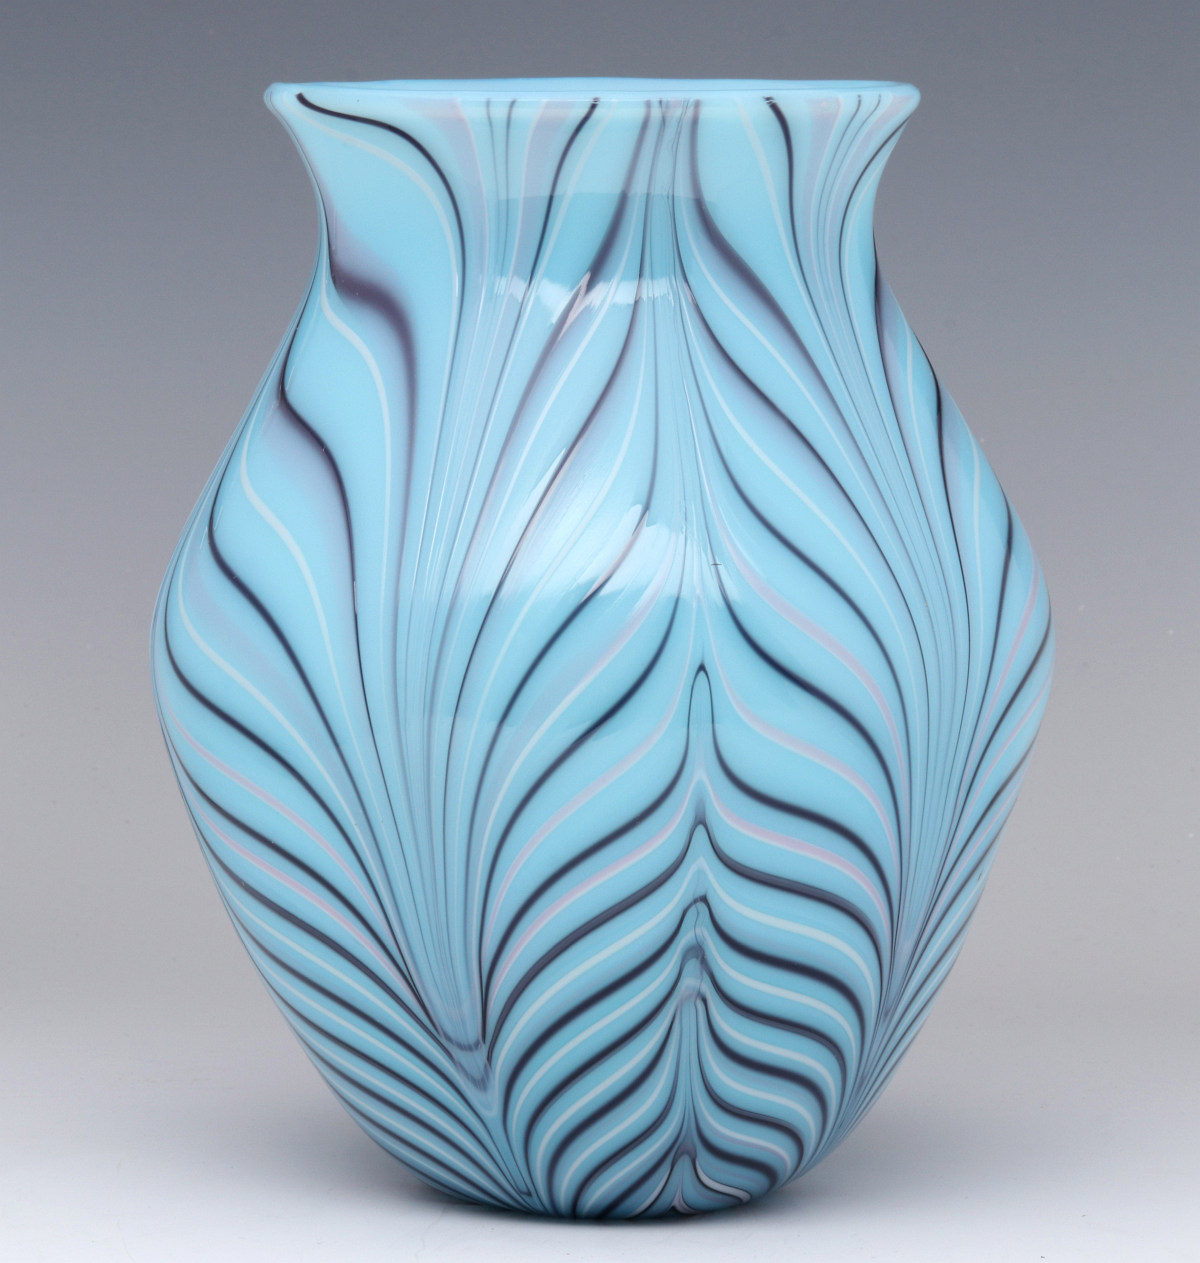 A DAVE FETTY PULLED FEATHER VASE FOR FENTON GLASS